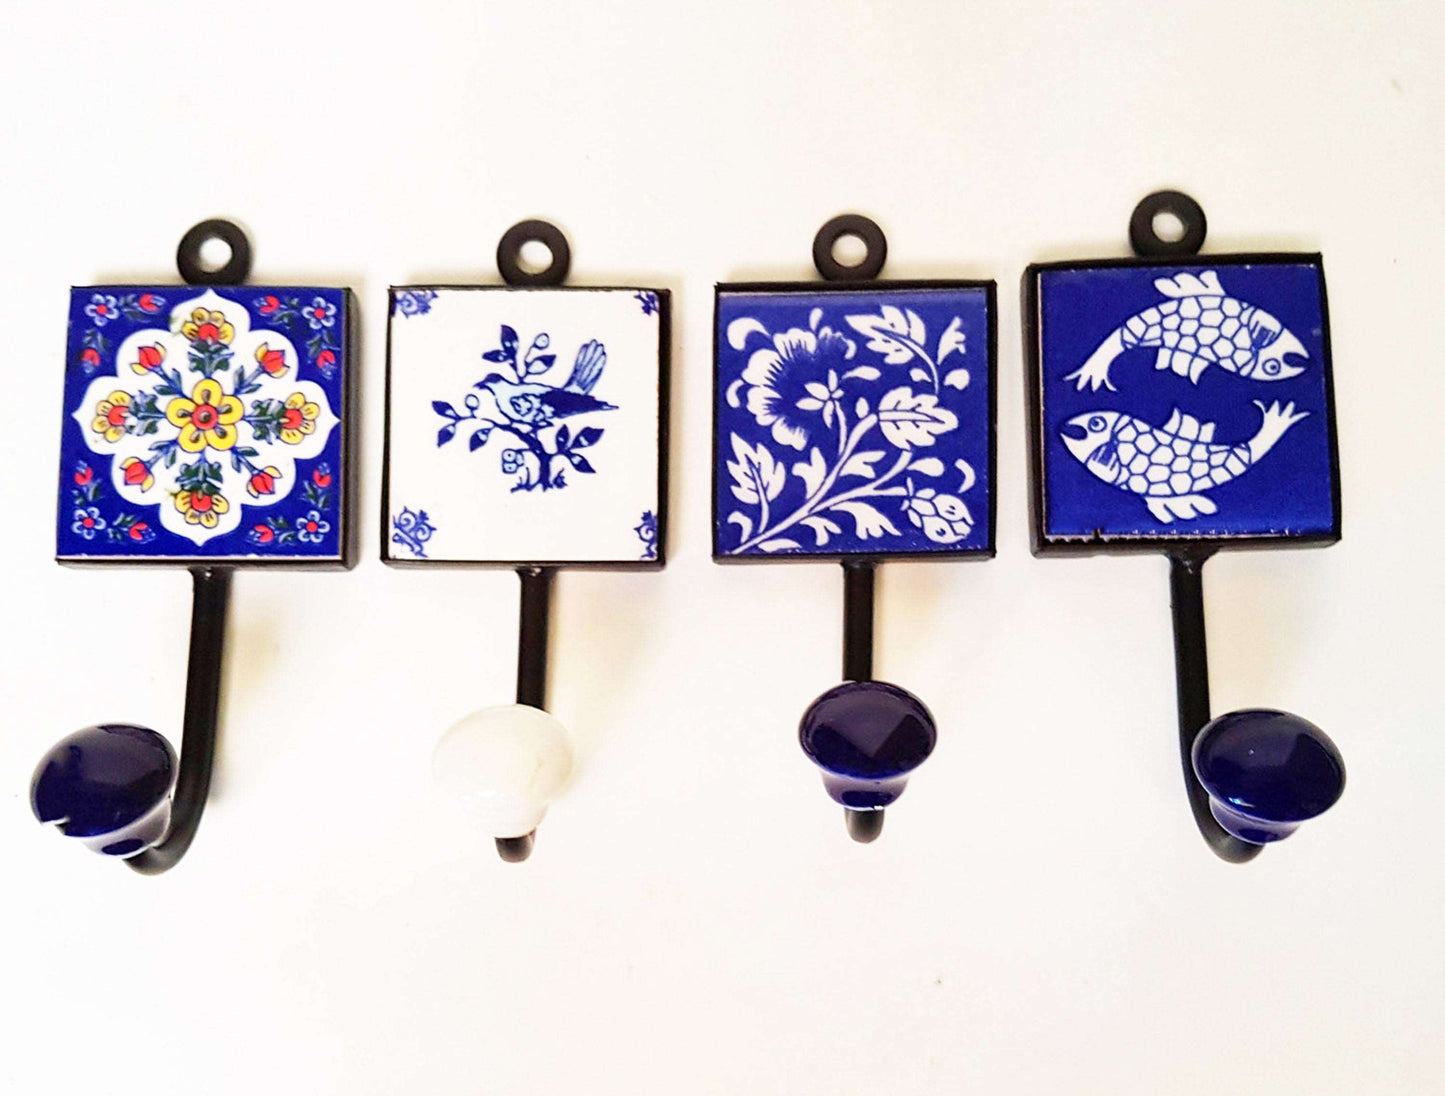 4 Zen blue and white coat hooks, wall hooks, cup hooks, towel hooks with smooth ball ends. Hand painted ceramic tile. 4.5 by 2 inches.